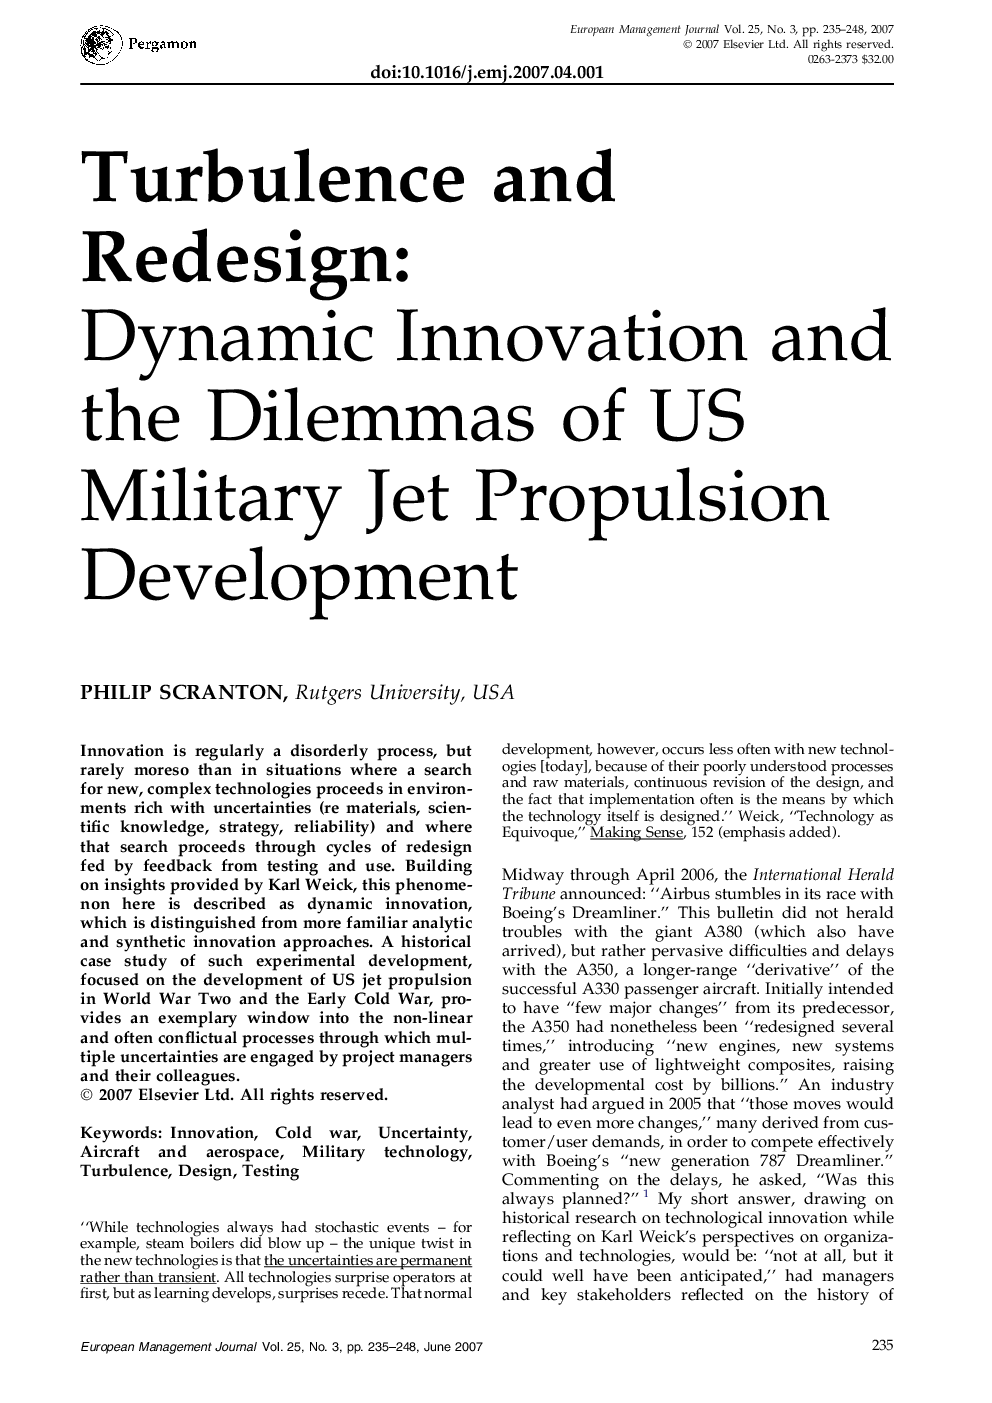 Turbulence and Redesign:: Dynamic Innovation and the Dilemmas of US Military Jet Propulsion Development